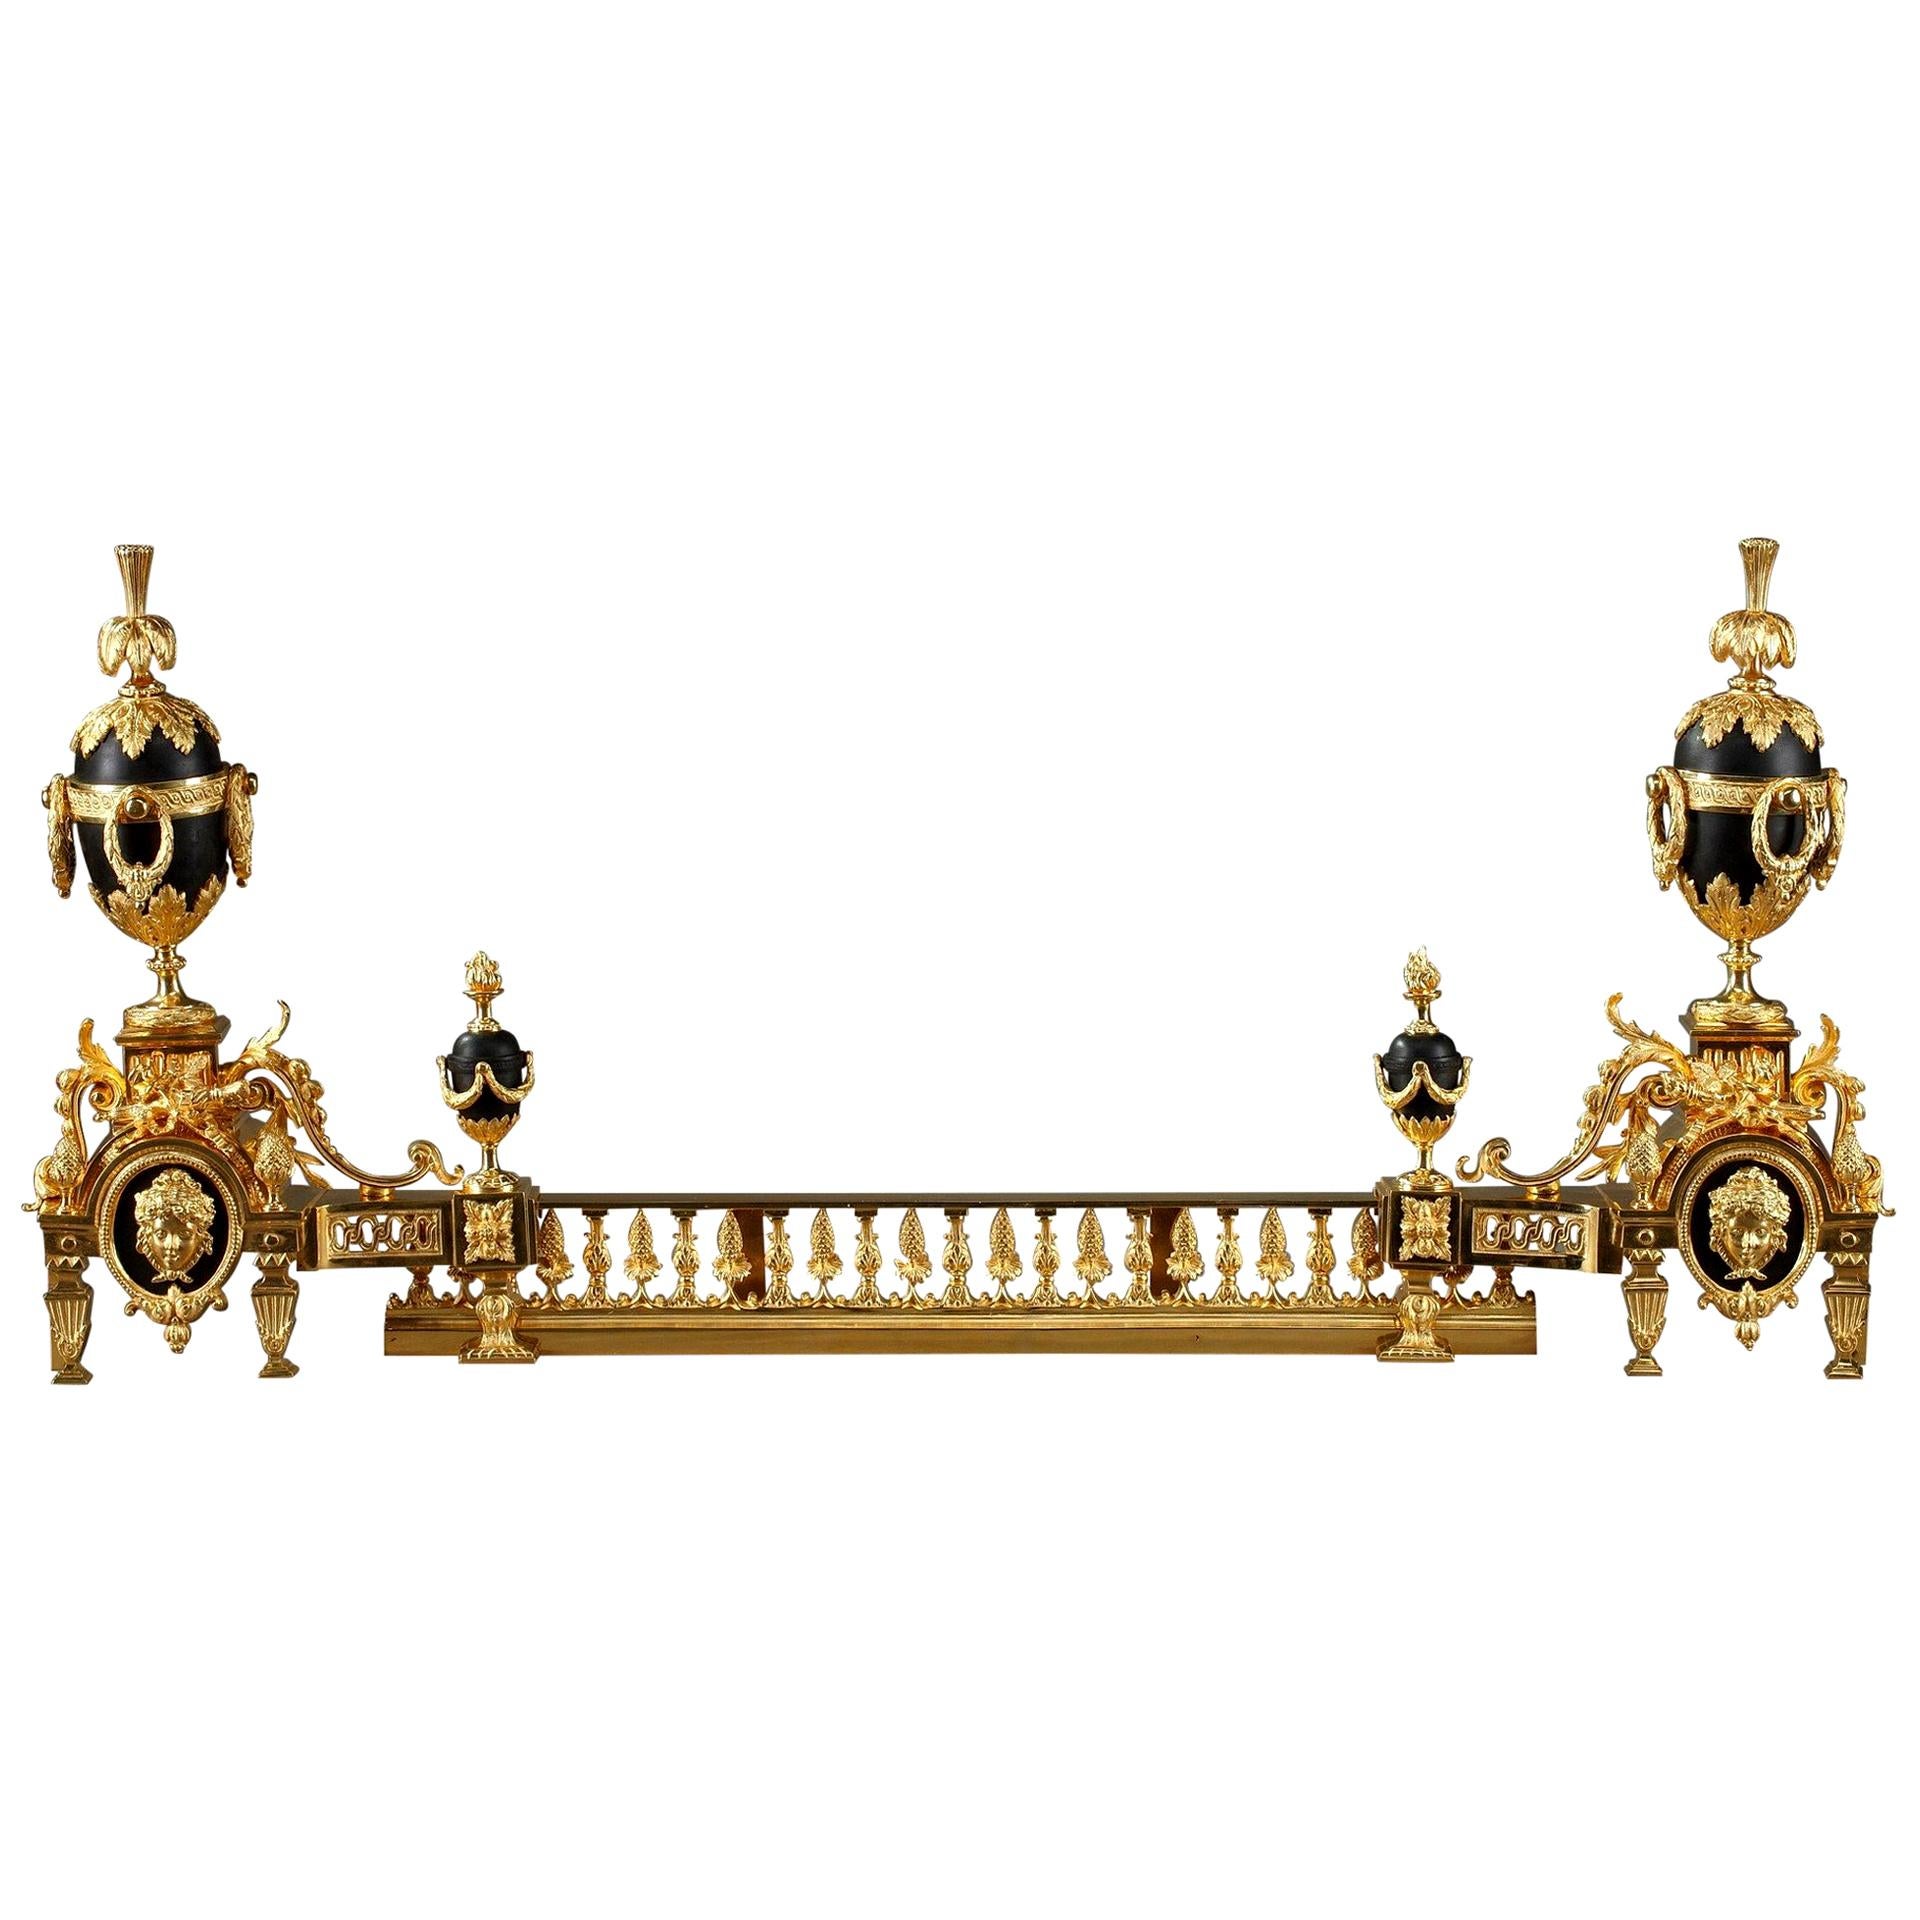 Antique Fireplace Andirons and Fender in Louis XVI Style